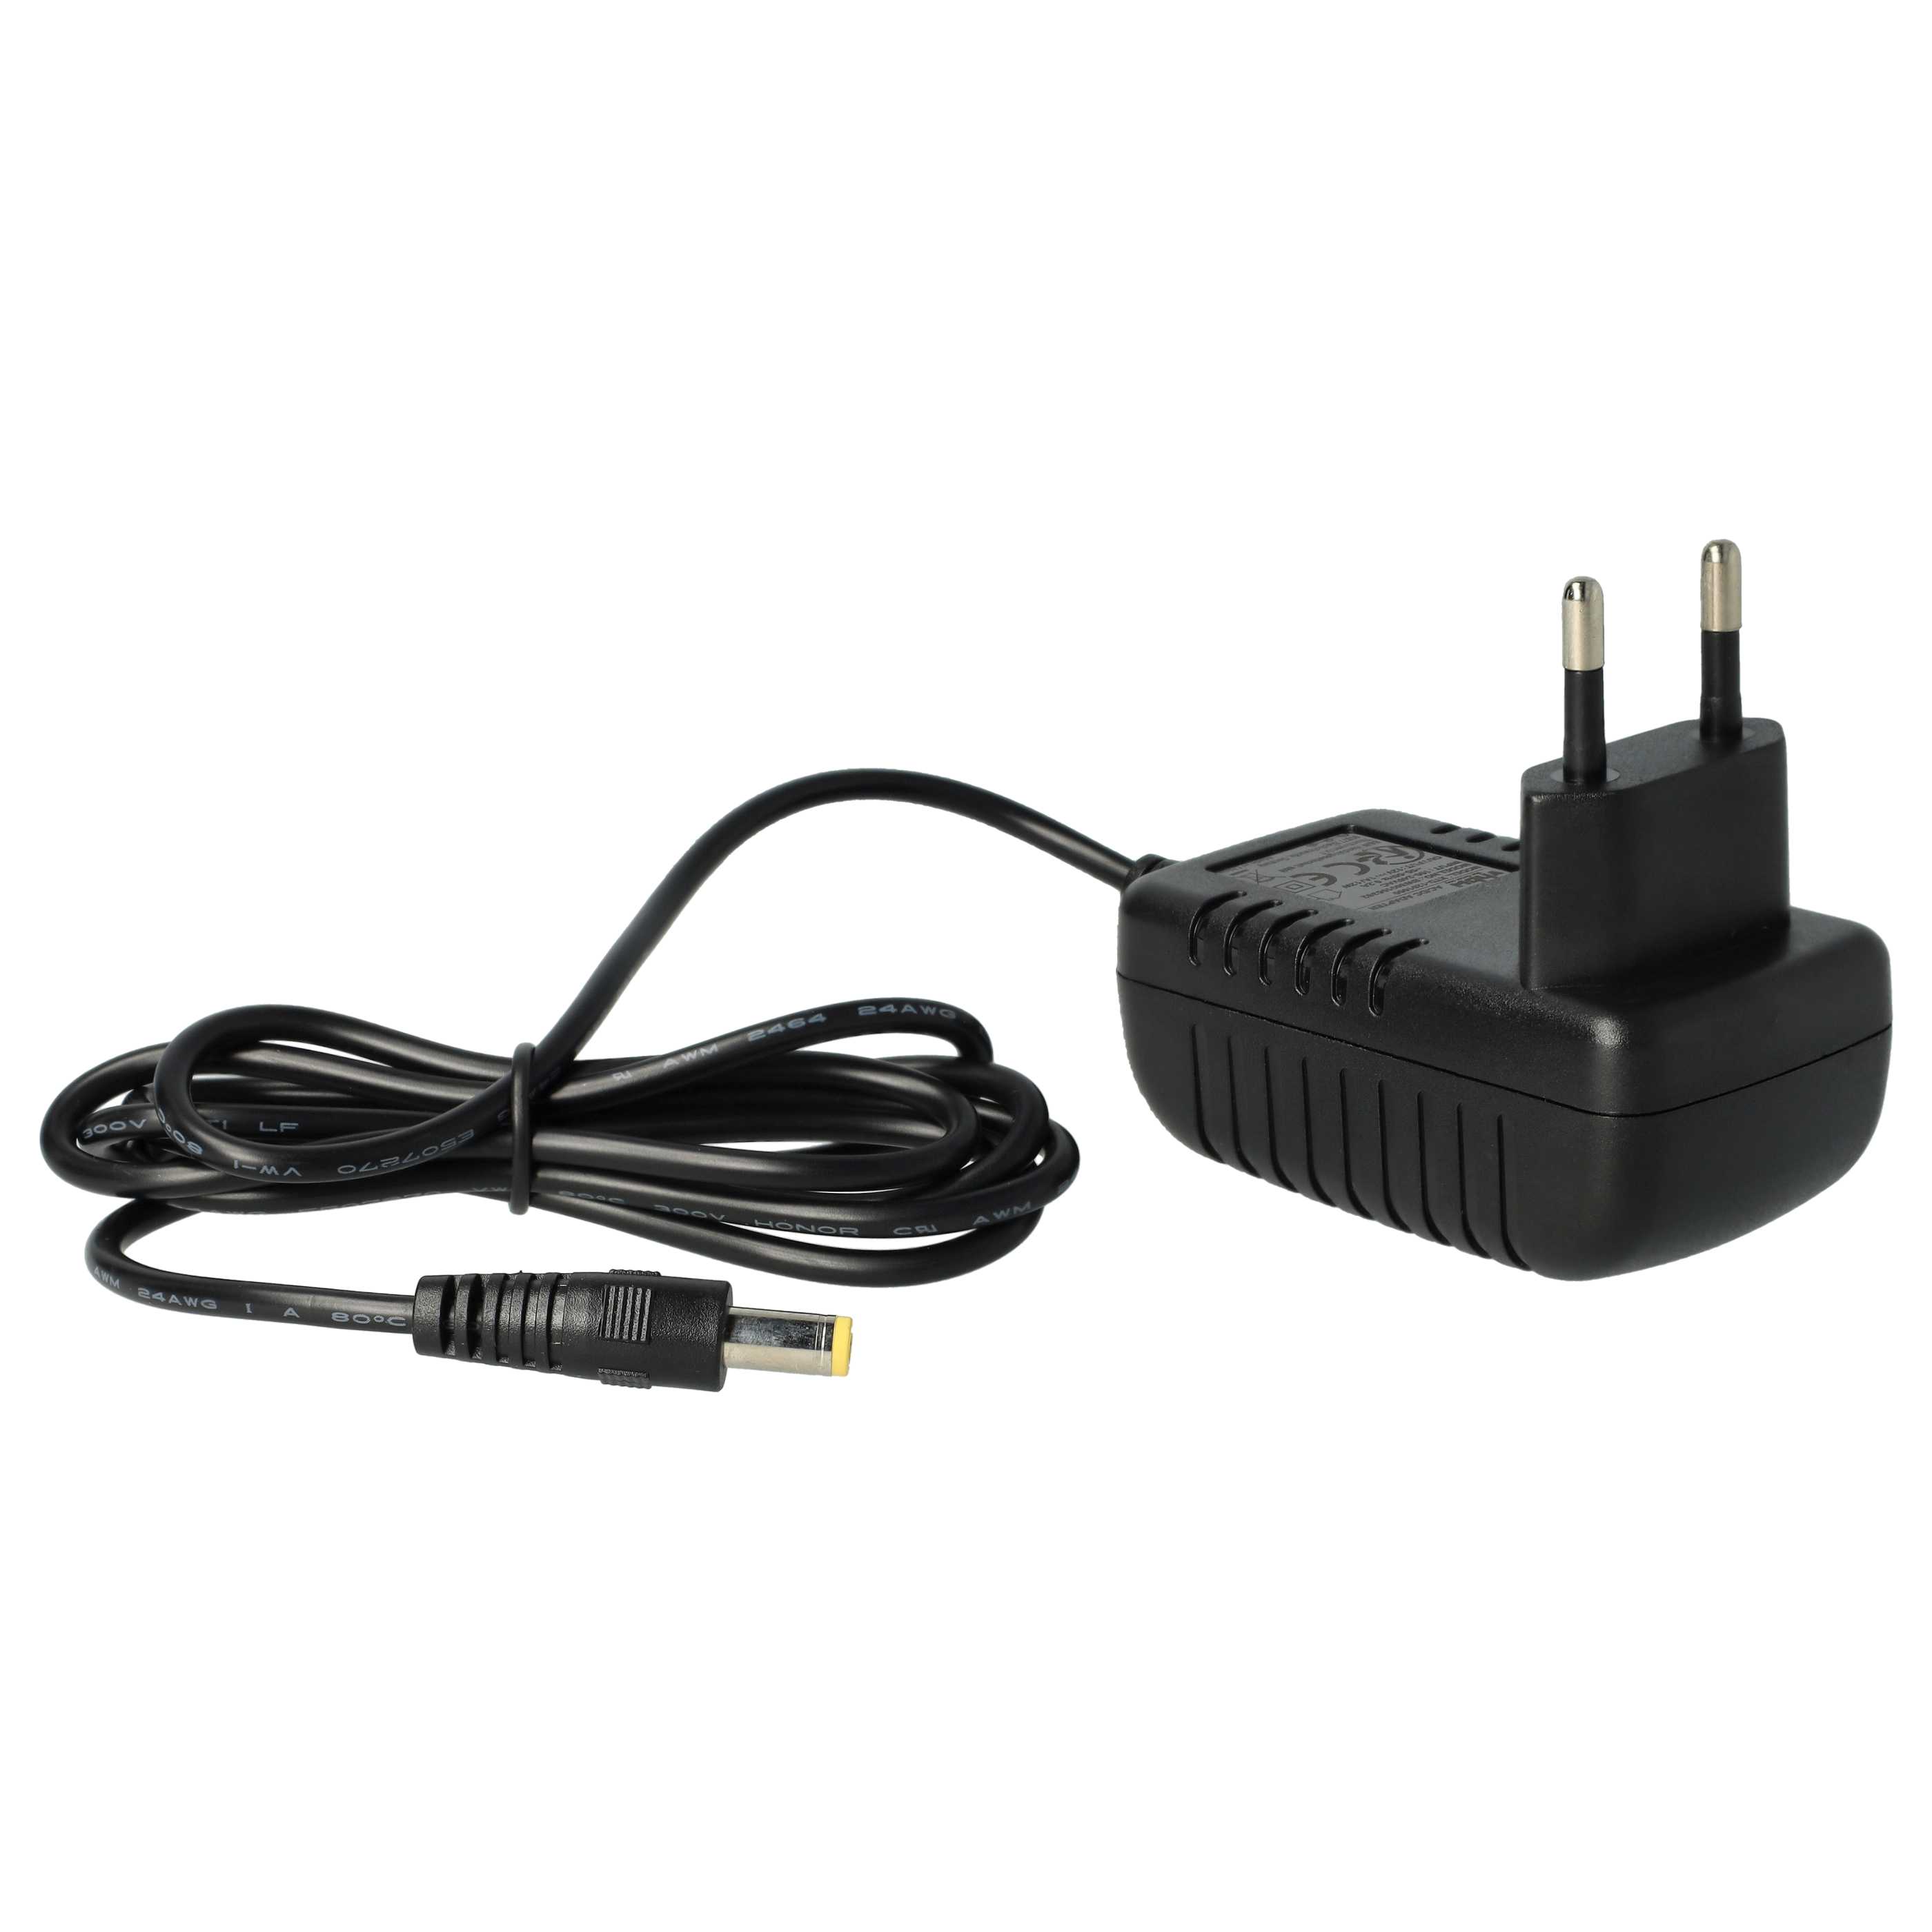 Mains Power Adapter replaces ADS0128-B 120100, DVE DSA-12G-12 FEU 120120 for Electric Devices - 140 cm 12 V